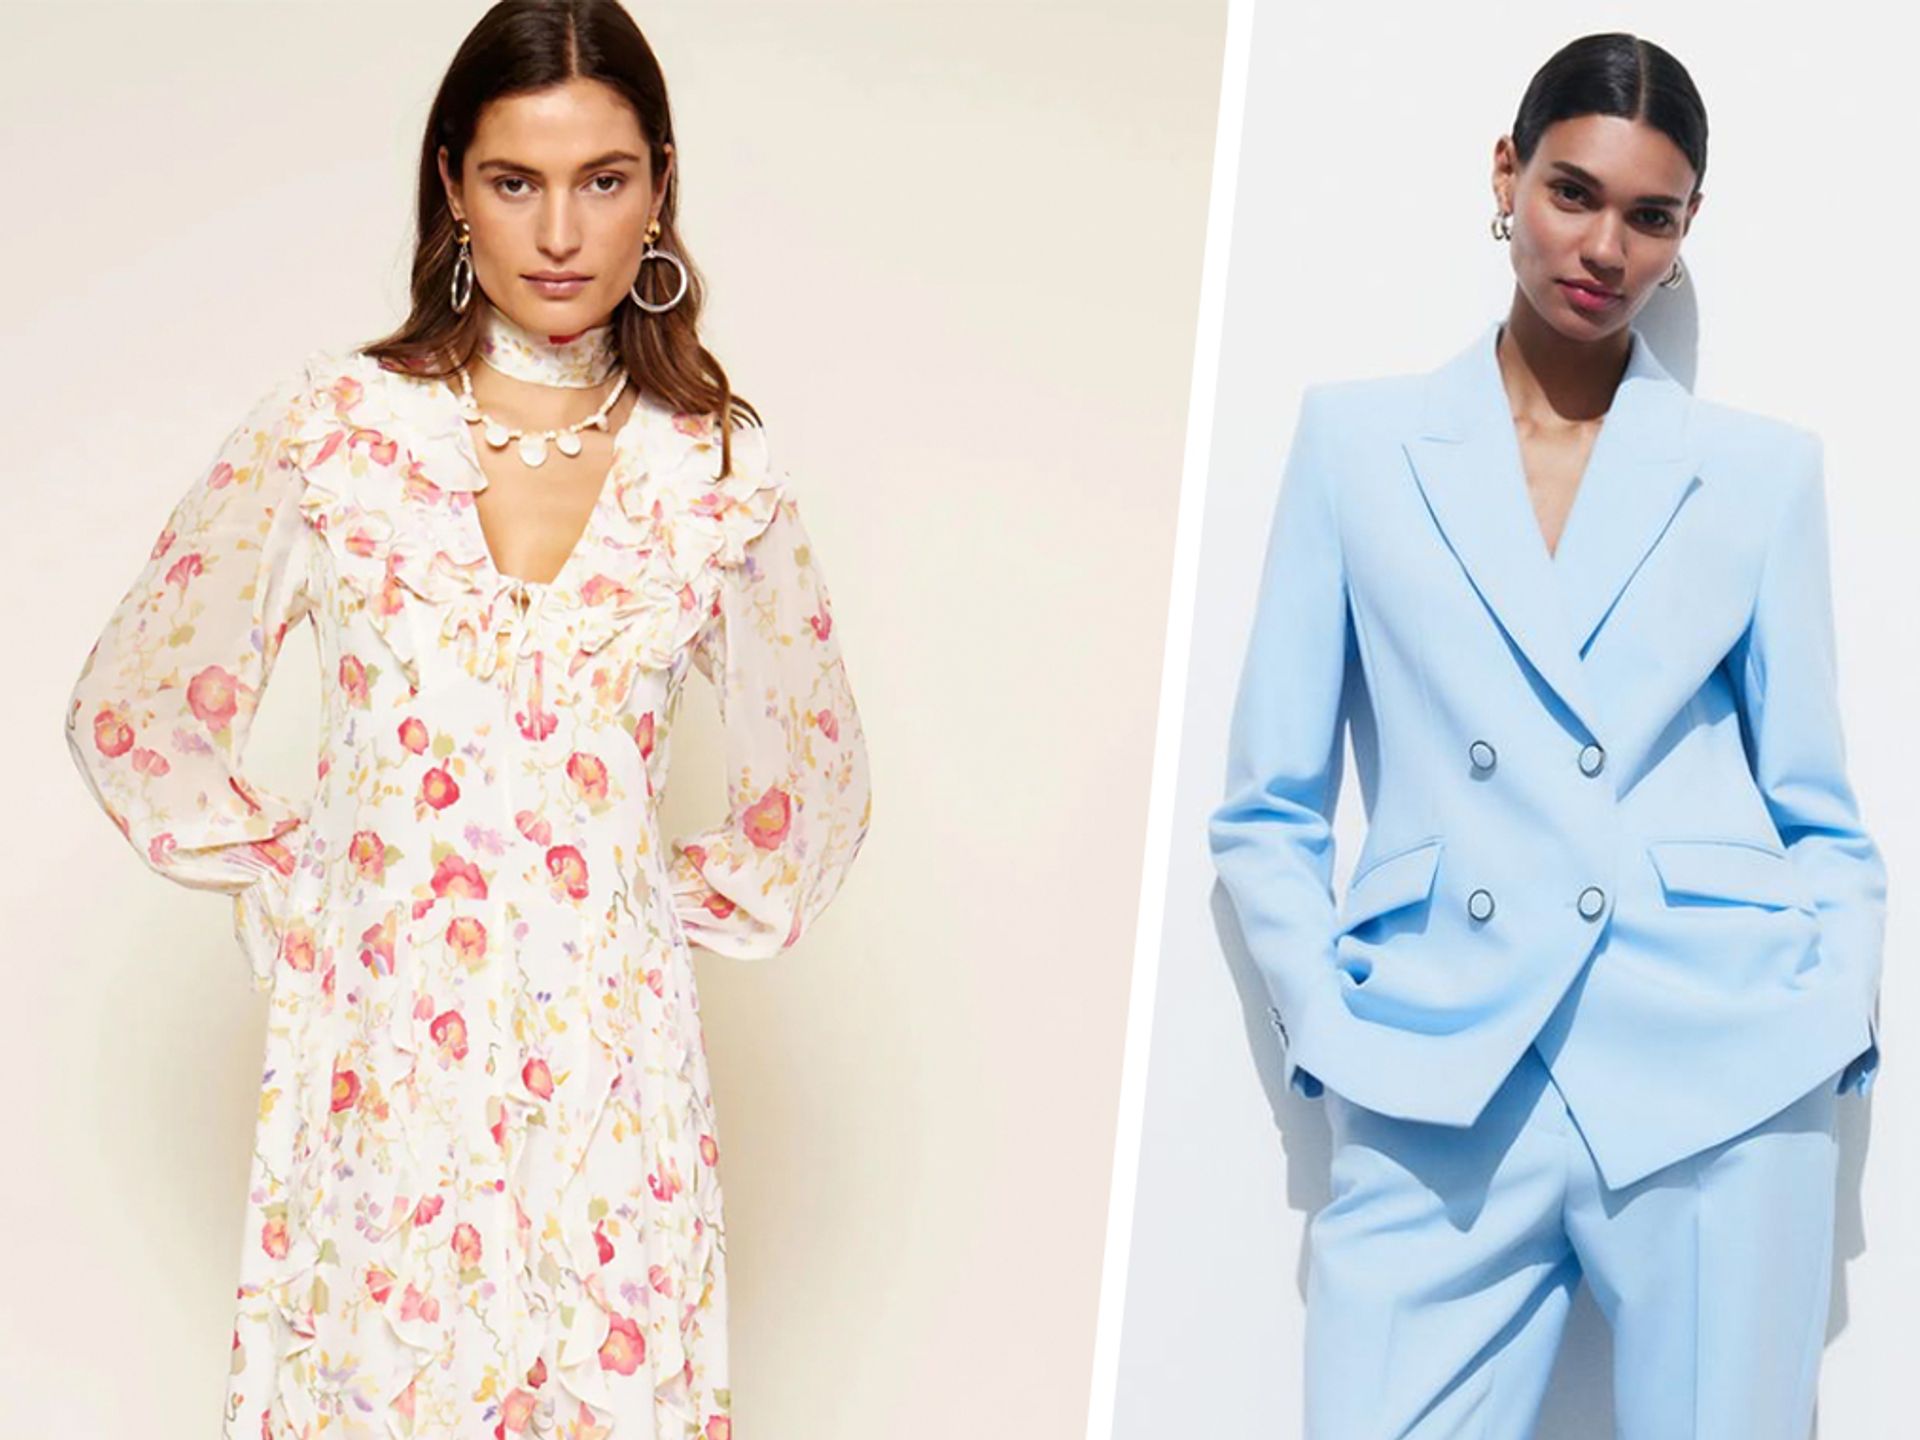 5 Wedding Guest Outfit Ideas For The Perfect Look - Capital Lifestyle